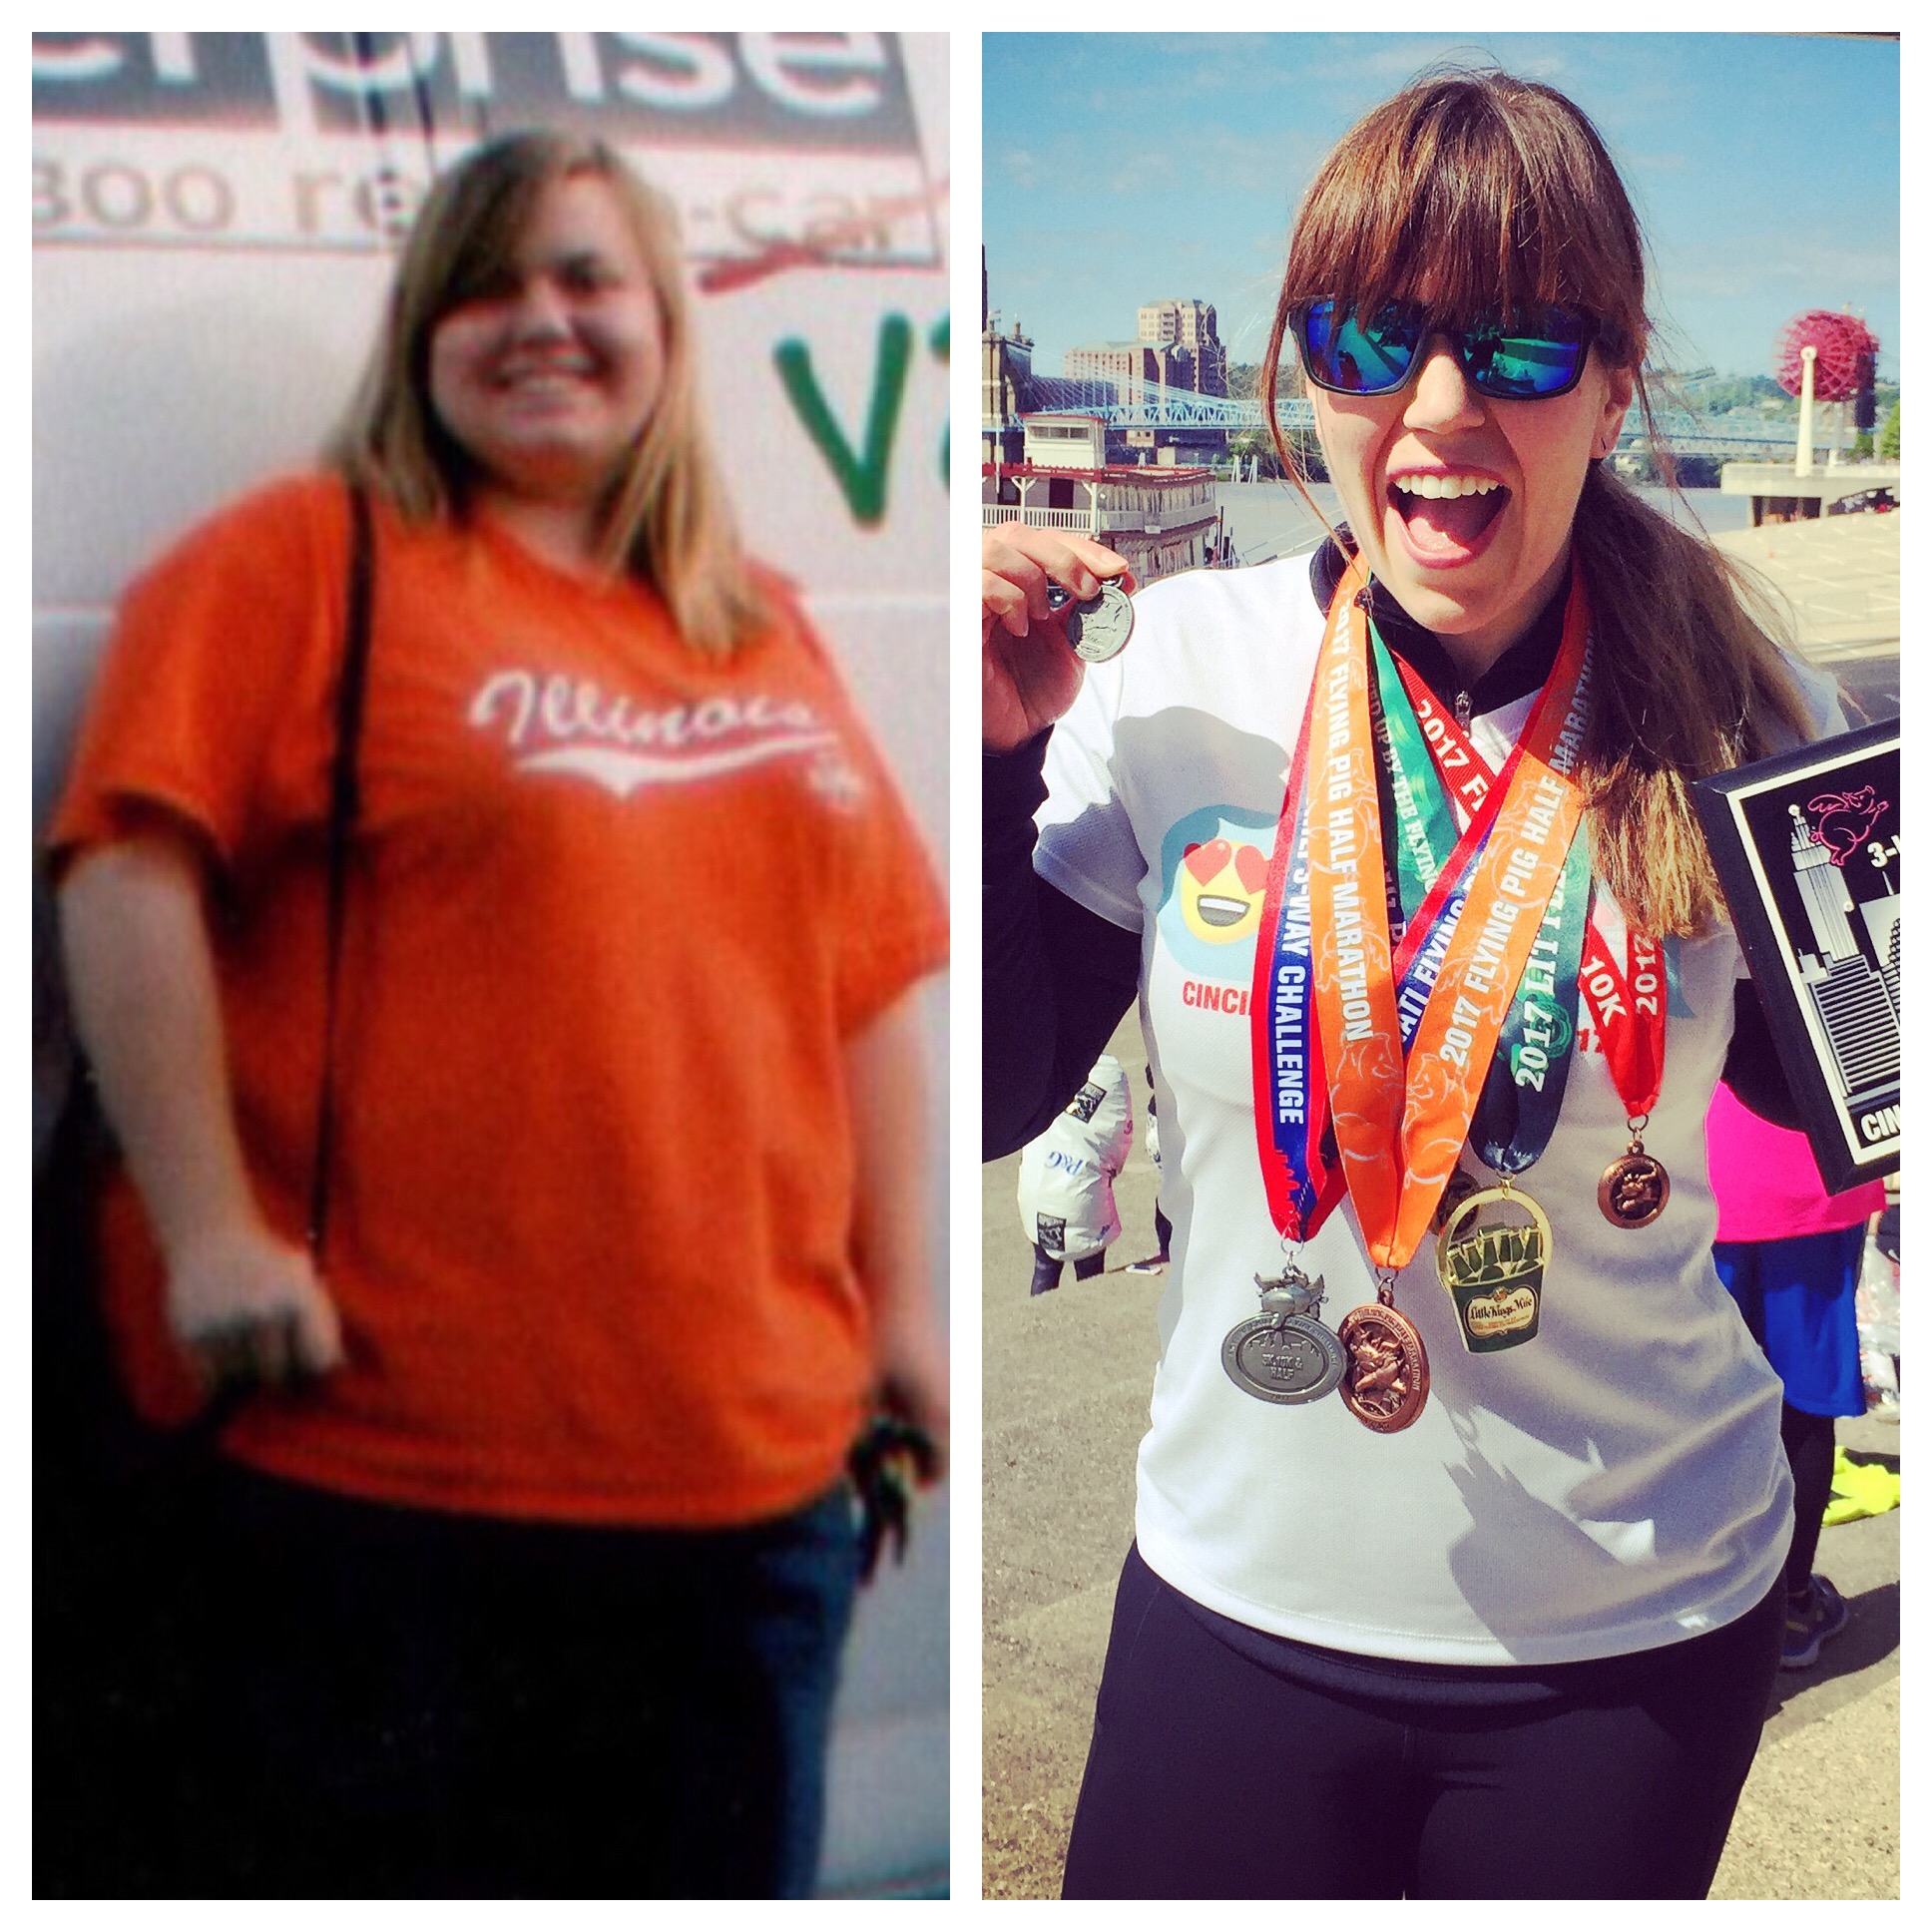 Podcast host Amanda Valentine before and after losing 100 lbs.